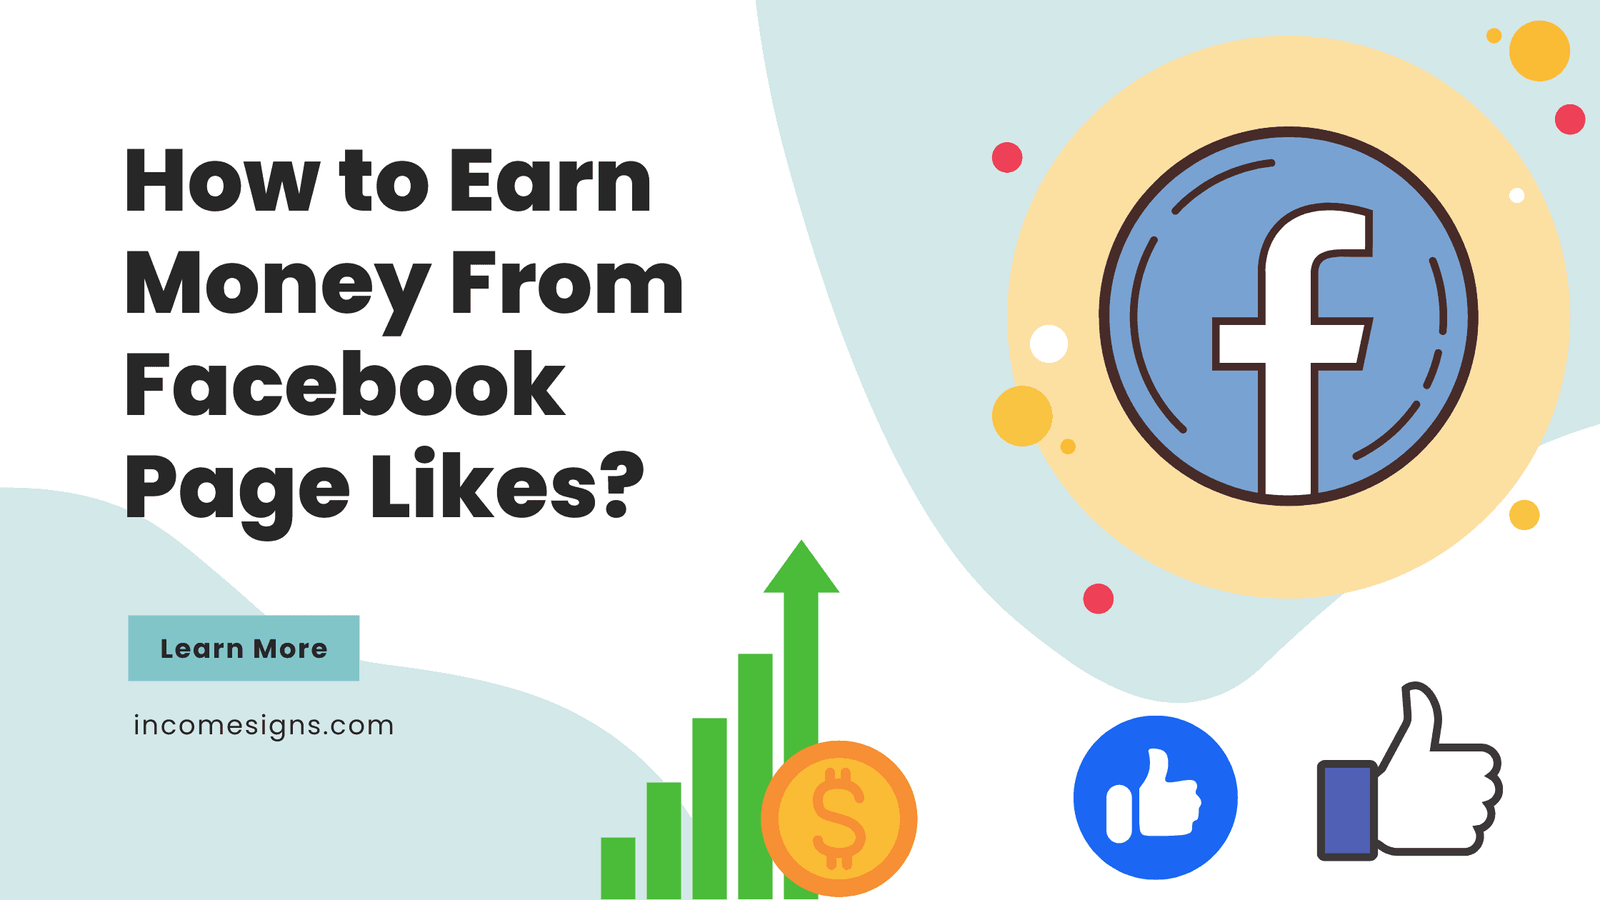 How to Earn Money From Facebook Page Likes - Income Signs